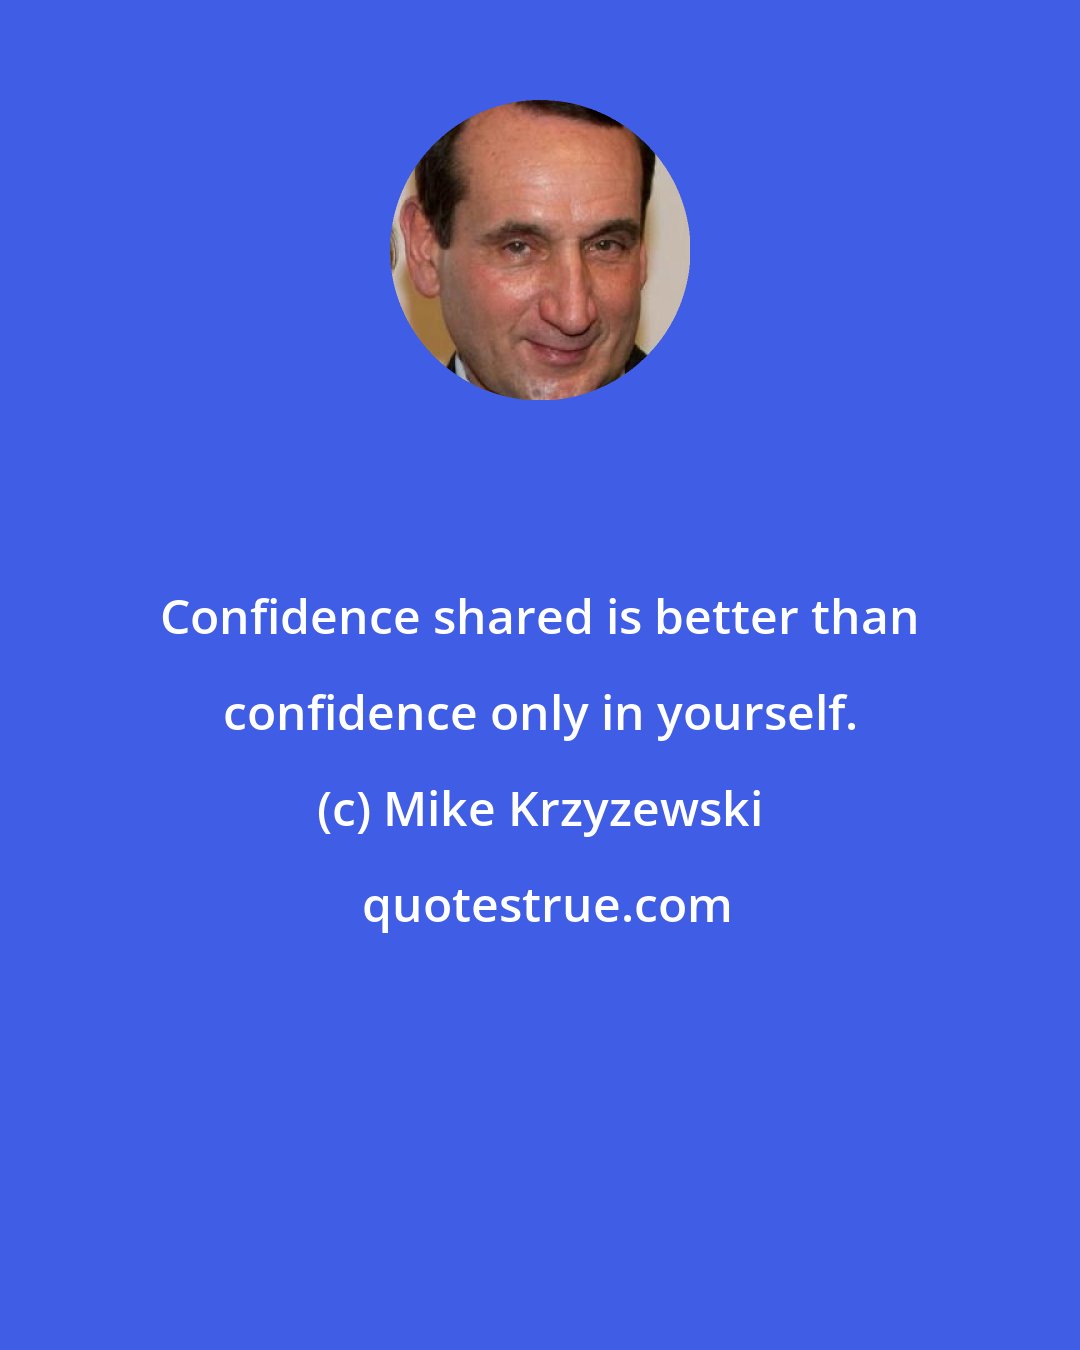 Mike Krzyzewski: Confidence shared is better than confidence only in yourself.